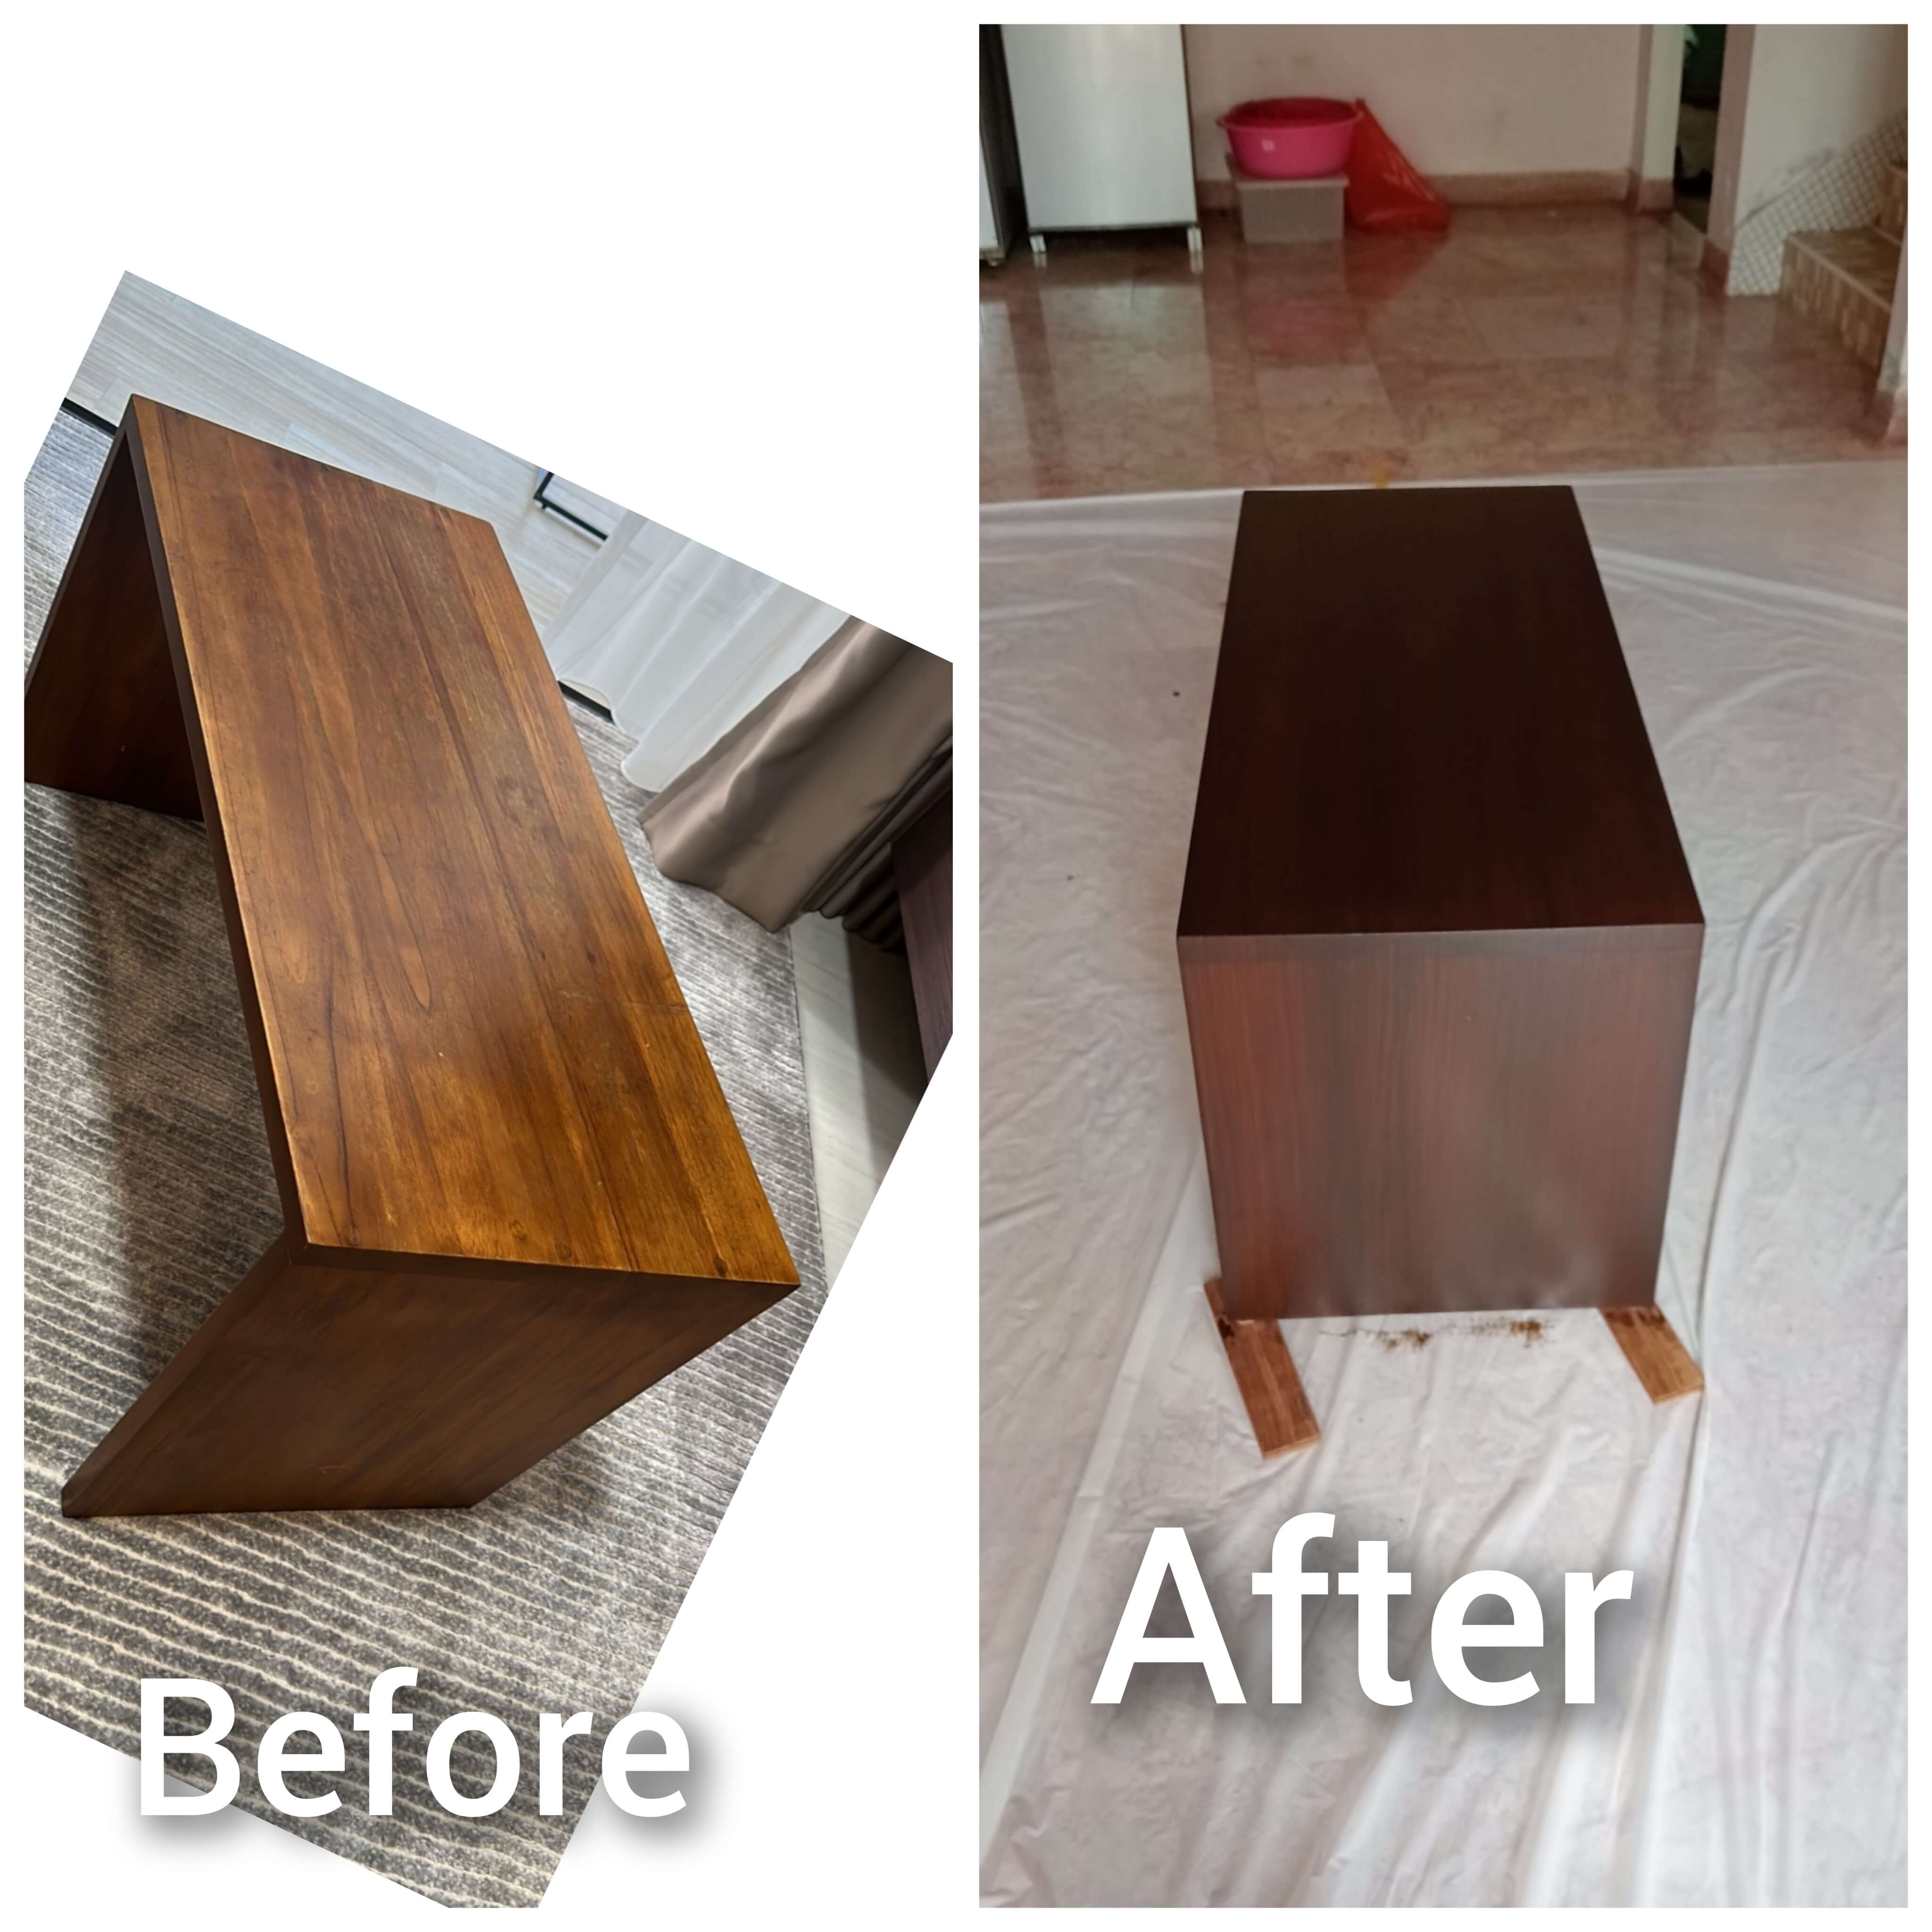  Before Varnishing and after Varnishing ca impact look likes new table